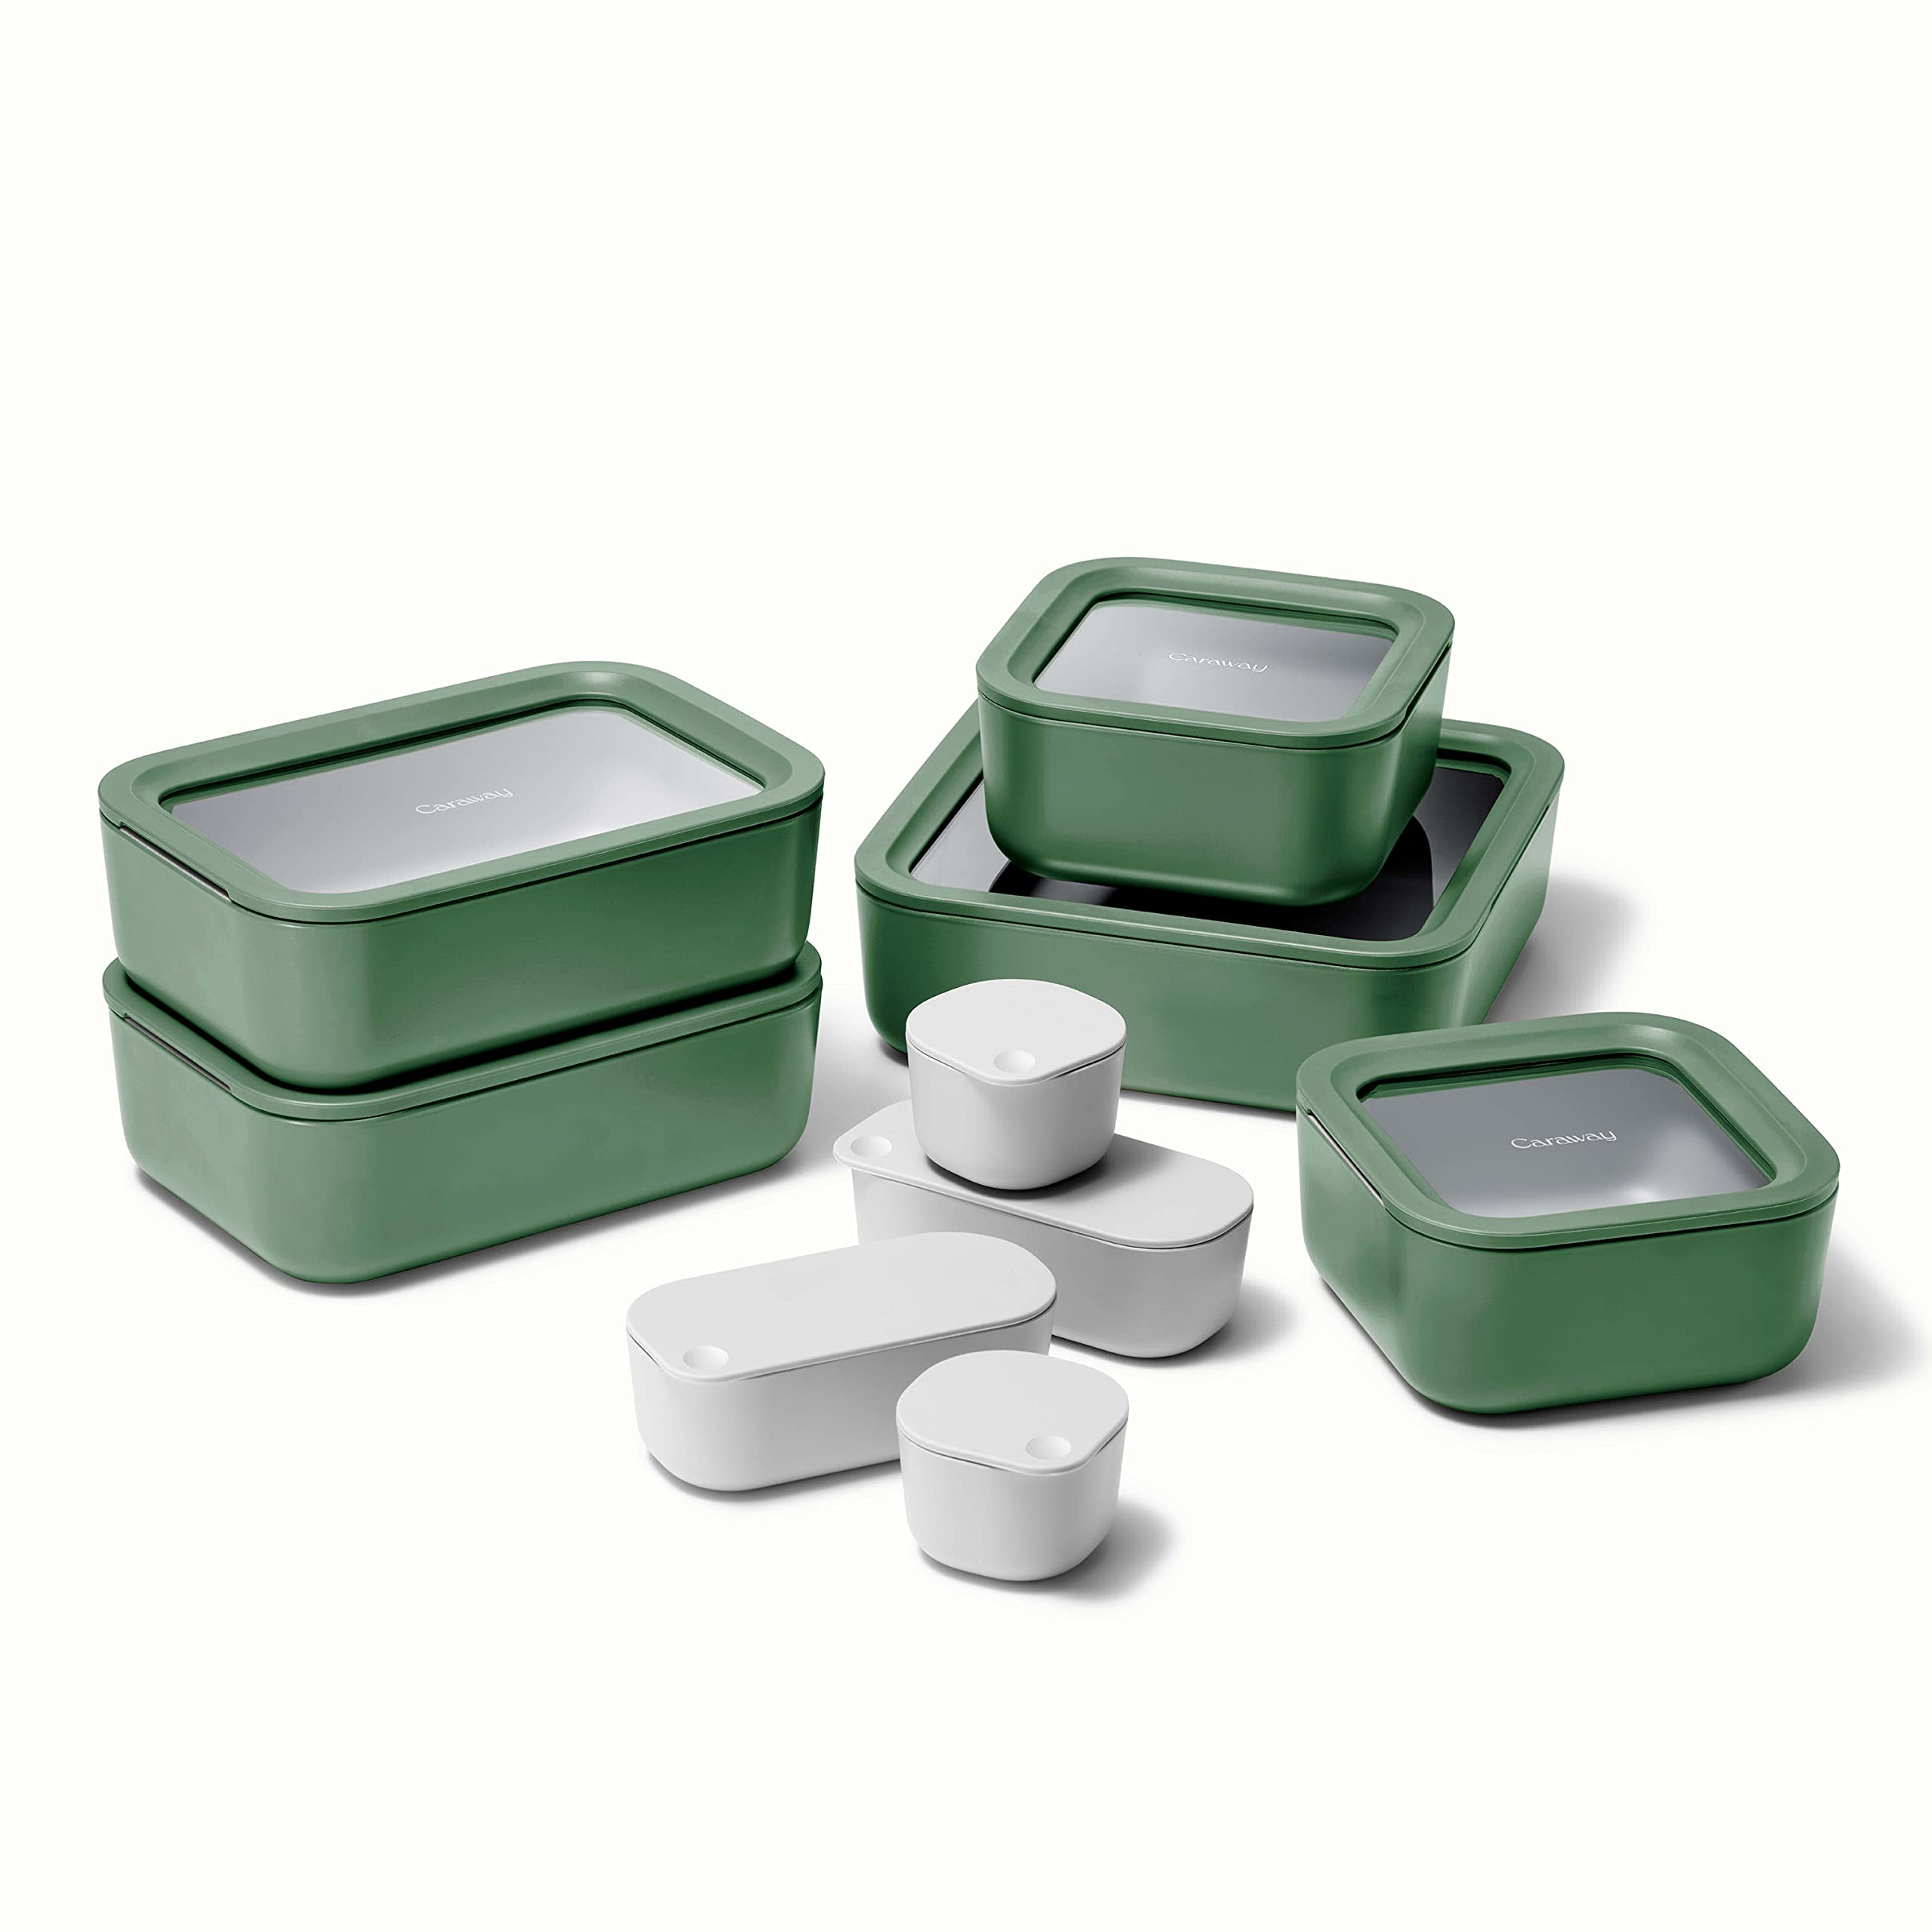 http://cdn.apartmenttherapy.info/image/upload/v1670601105/gen-workflow/product-database/Best_food_storage_containers_Caraway.jpg